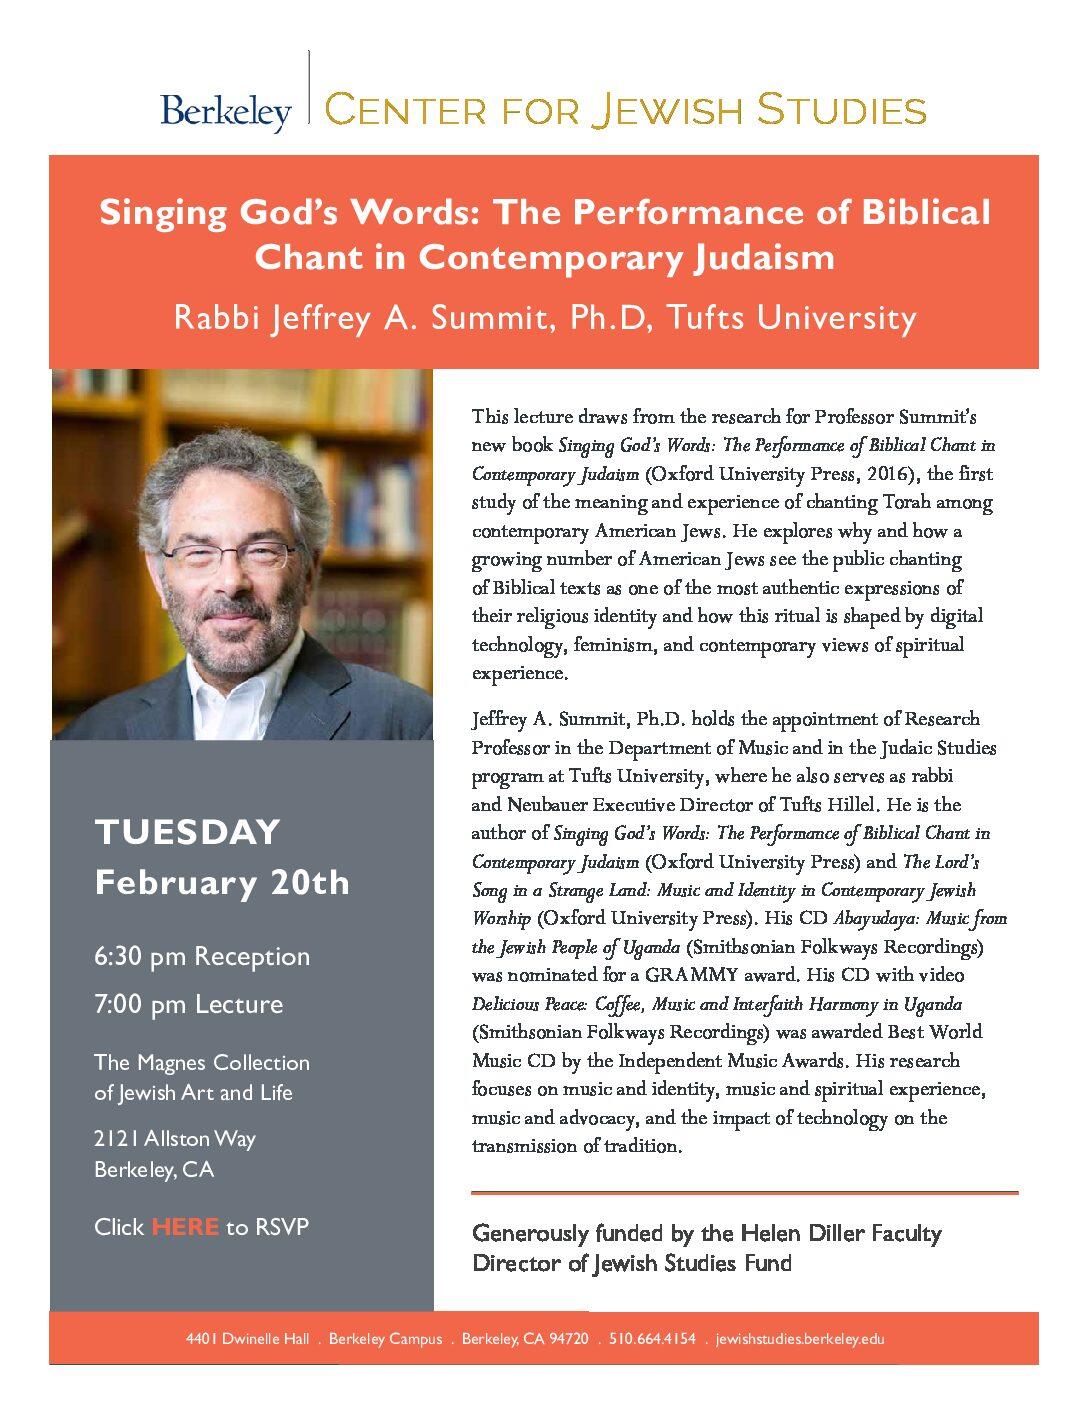  The Performance of Biblical Chant in Contemporary Judaism”